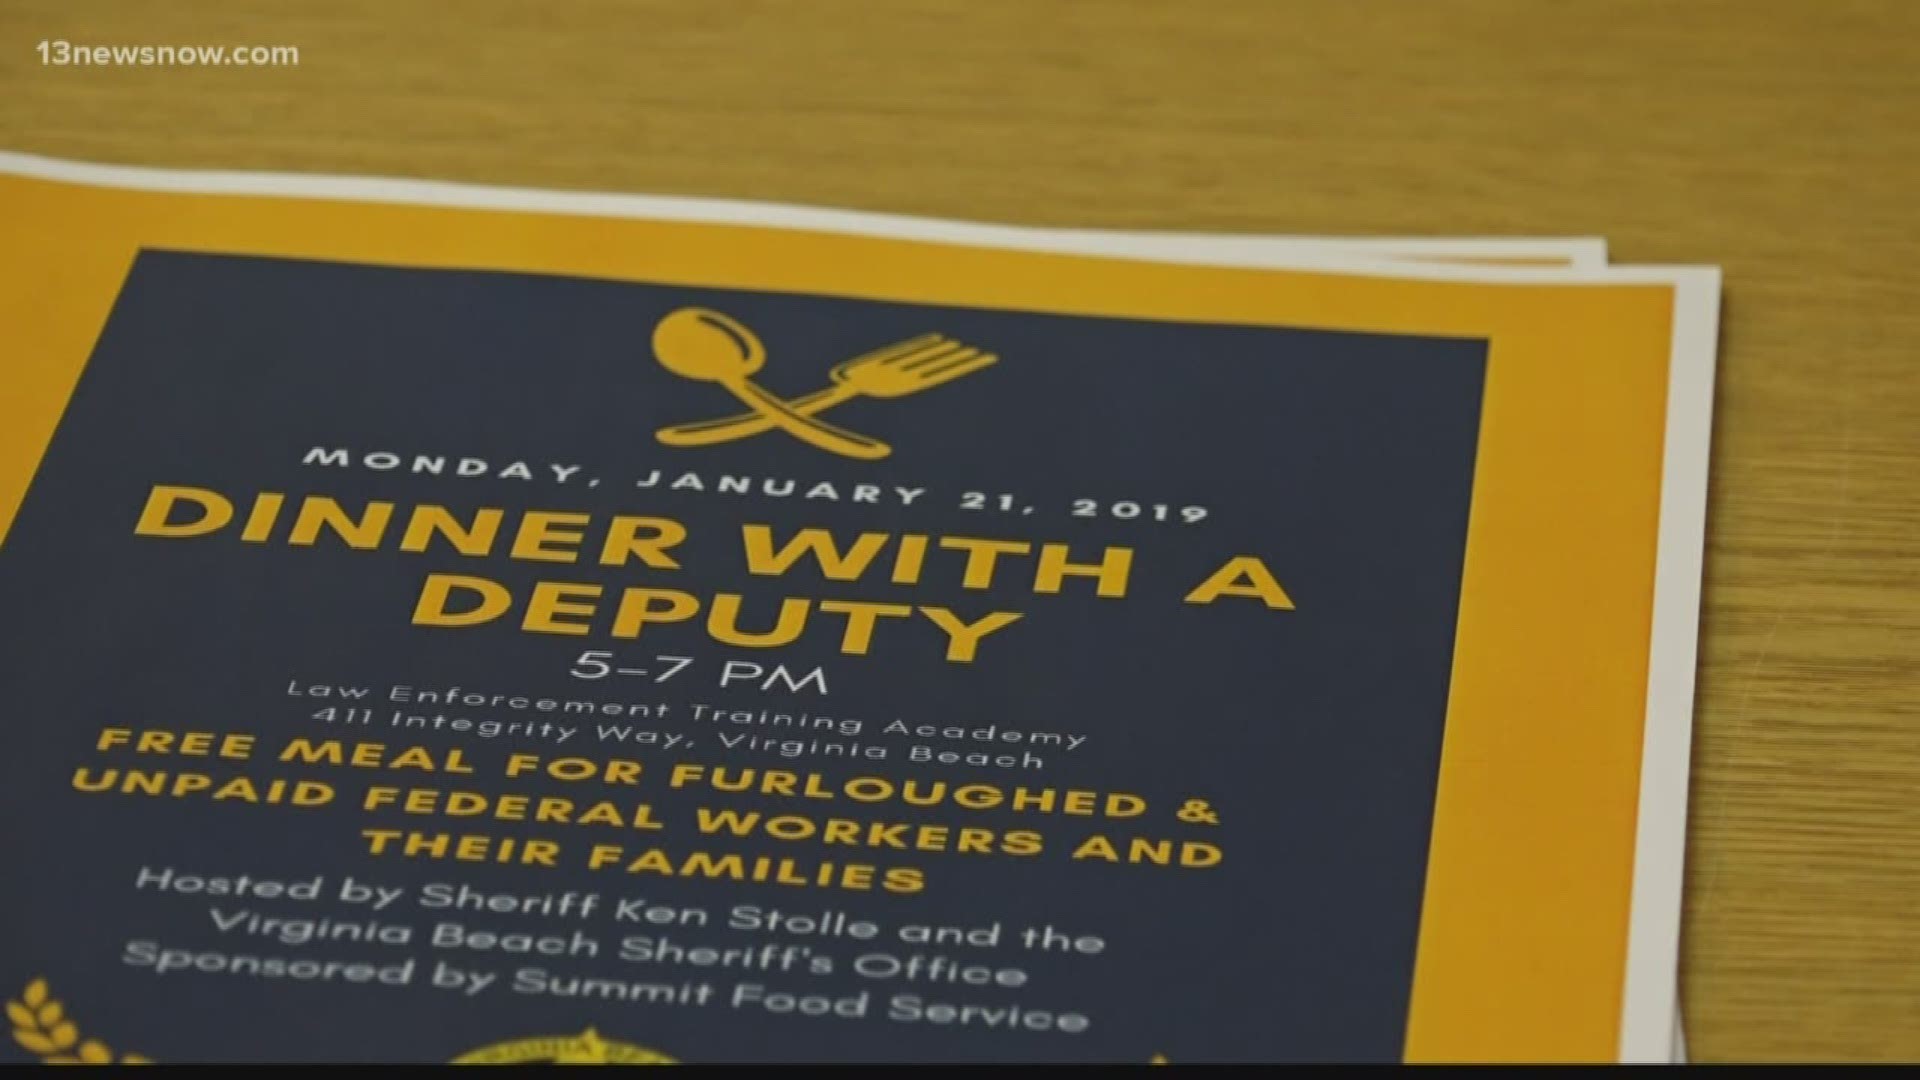 The Virginia Beach Sheriff's Office served dinner to local furloughed workers.